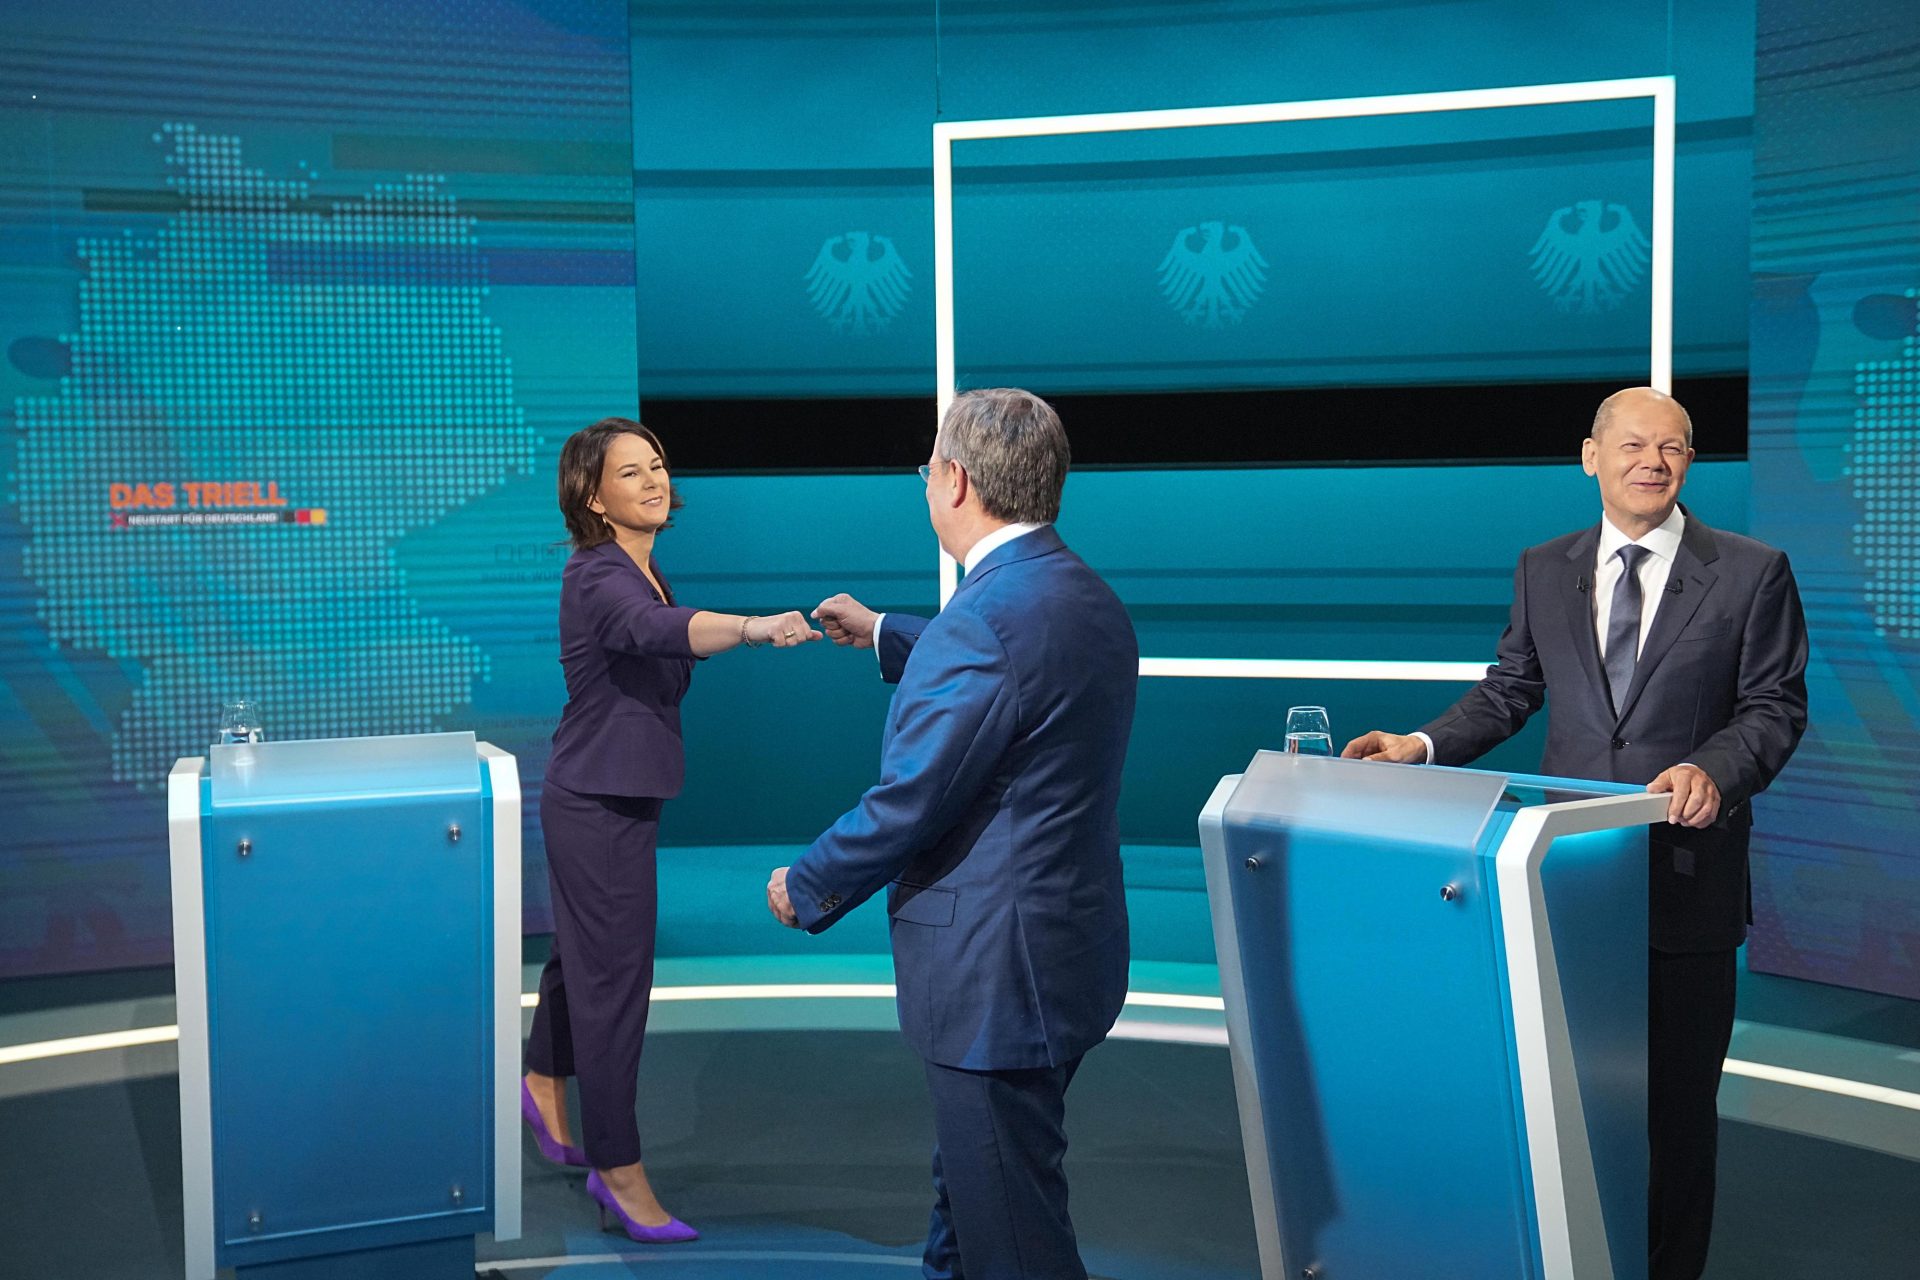 Chancellor candidate Annalena Baerbock of the Greens fistbumps the SPD’s Olaf Scholz after their first TV debate with Armin Laschet of the CDU. Photo: Michael Kappeler/Pool/Getty Images.